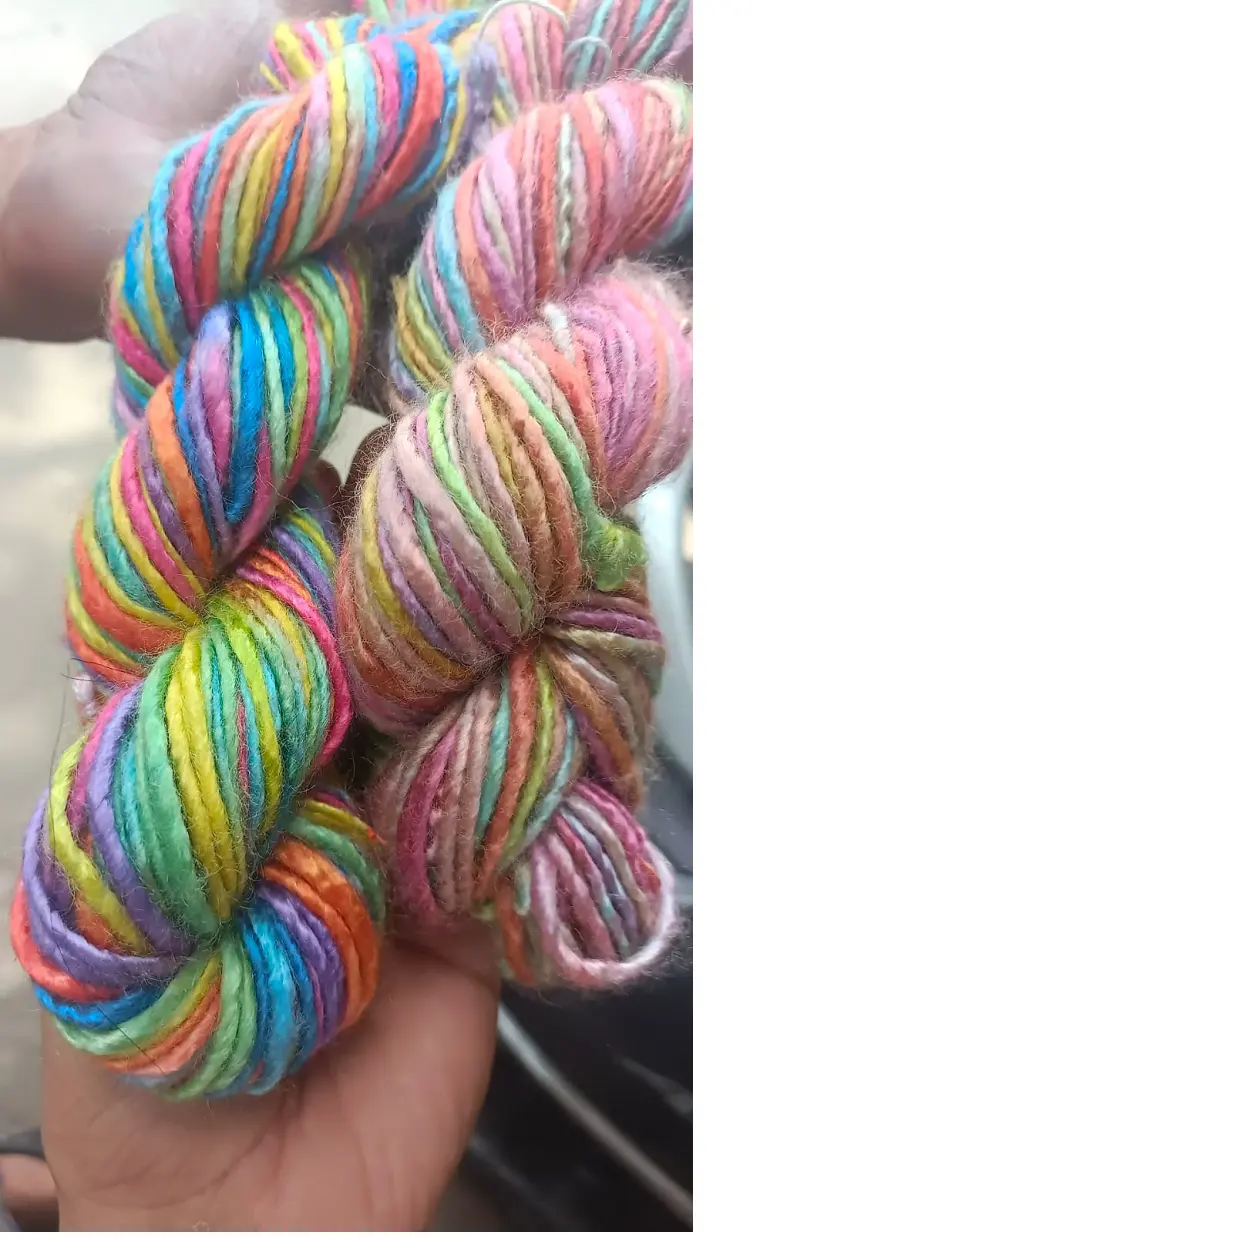 custom natural dyed bamboo yarns available in an assortment of tie and dyed colors ideal for resale by yarn buyers